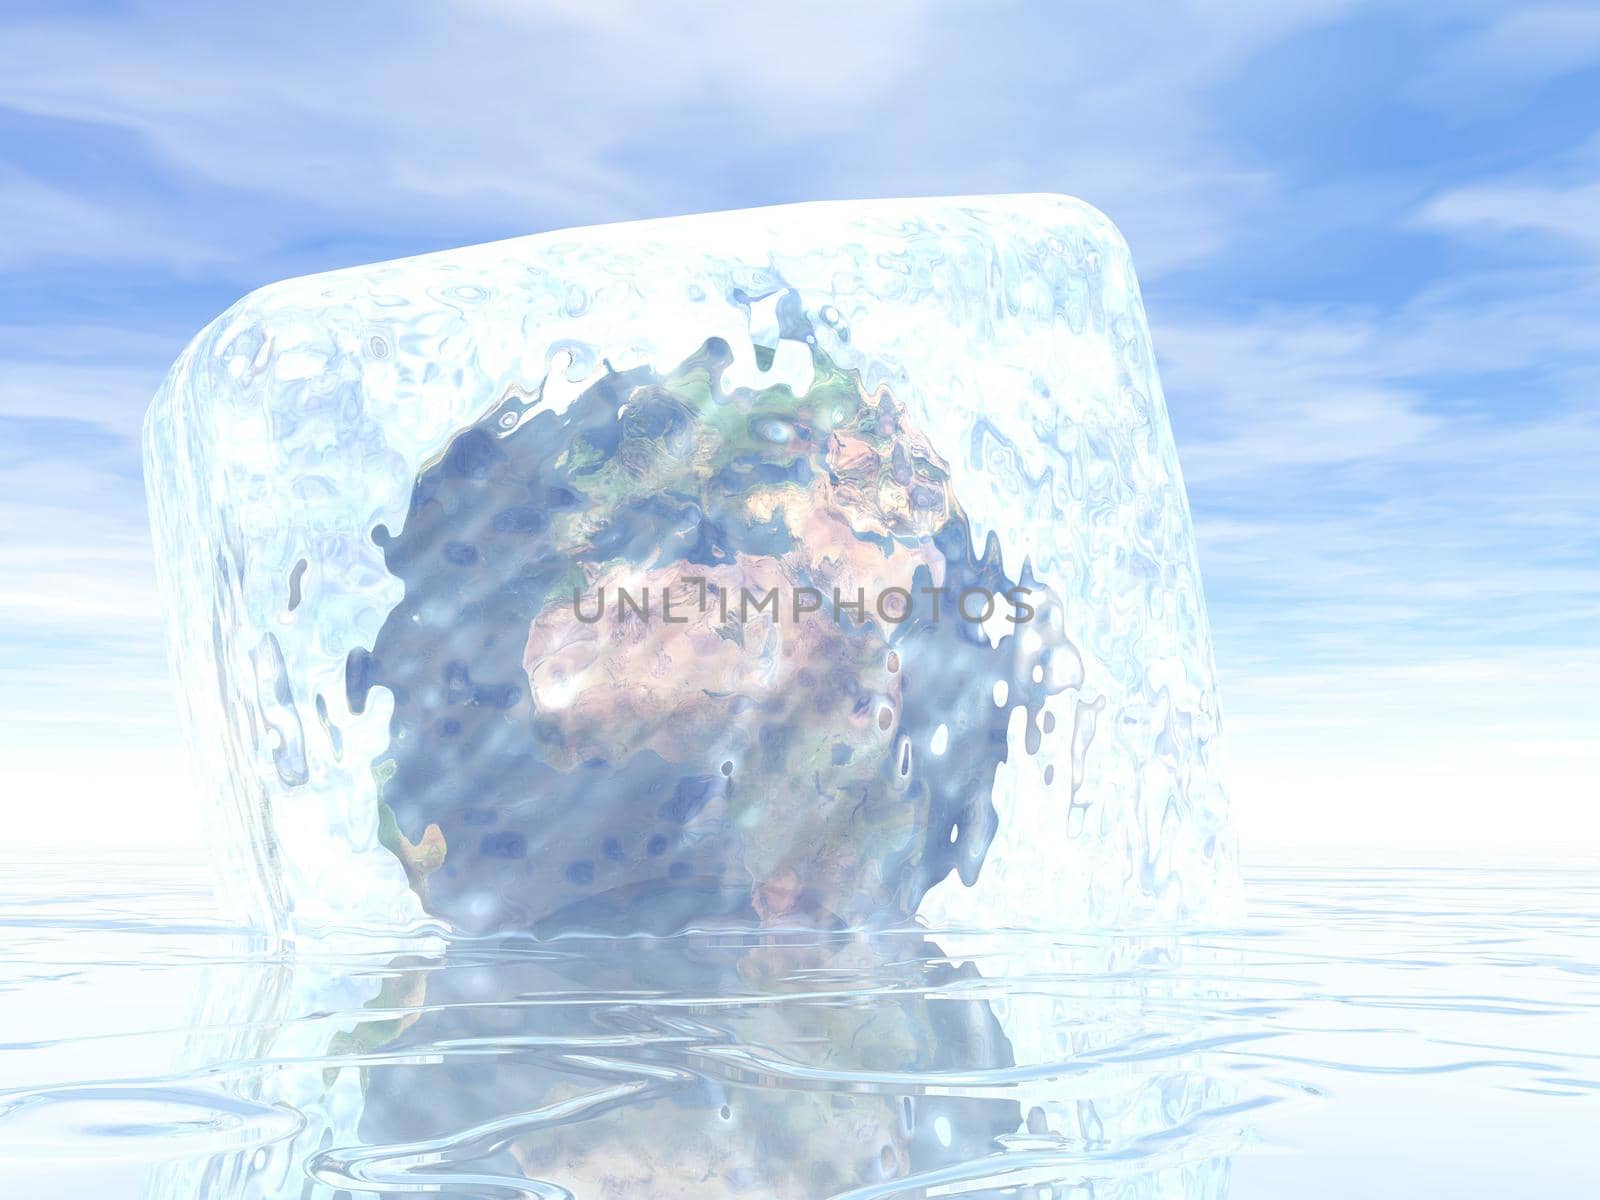 Earth planet imprisoned in an ice cube on water by beautiful day